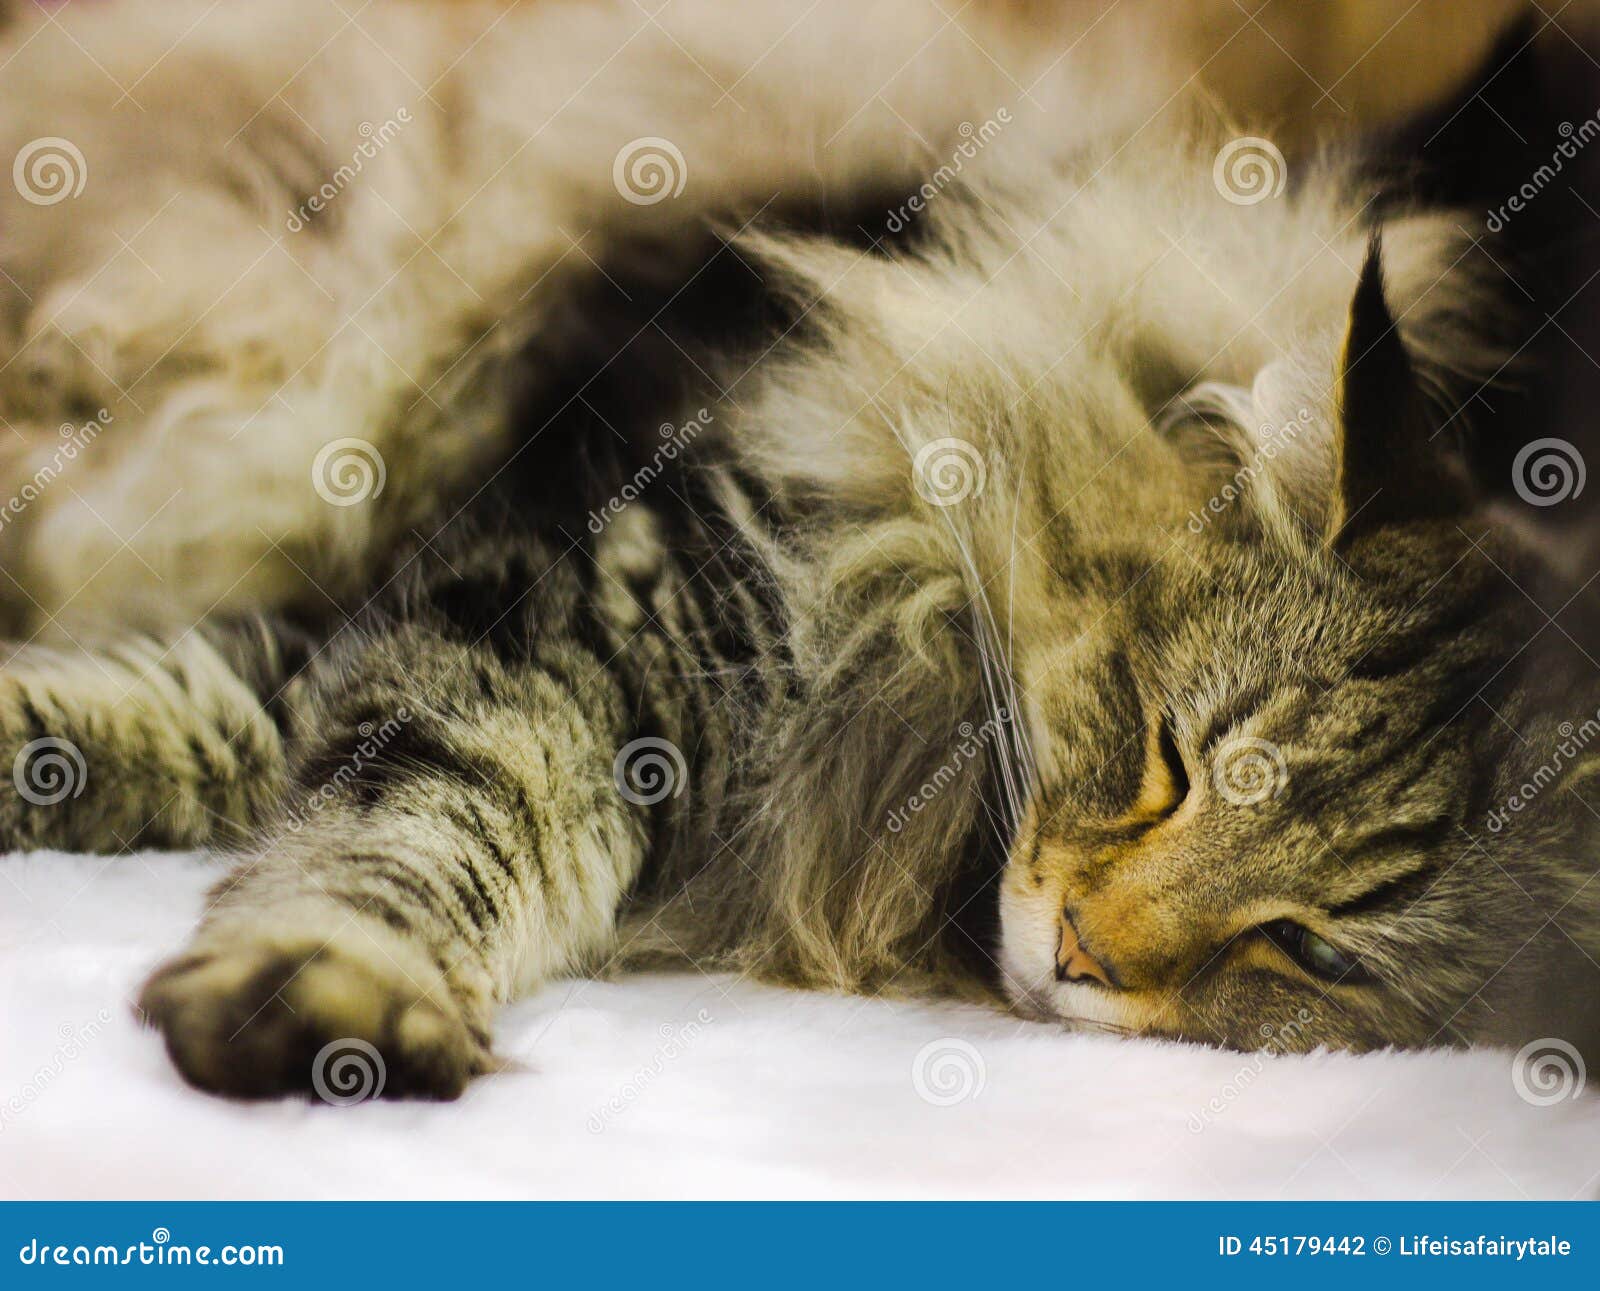 30,225 Sleeping Animals Stock Photos - Free & Royalty-Free Stock Photos  from Dreamstime